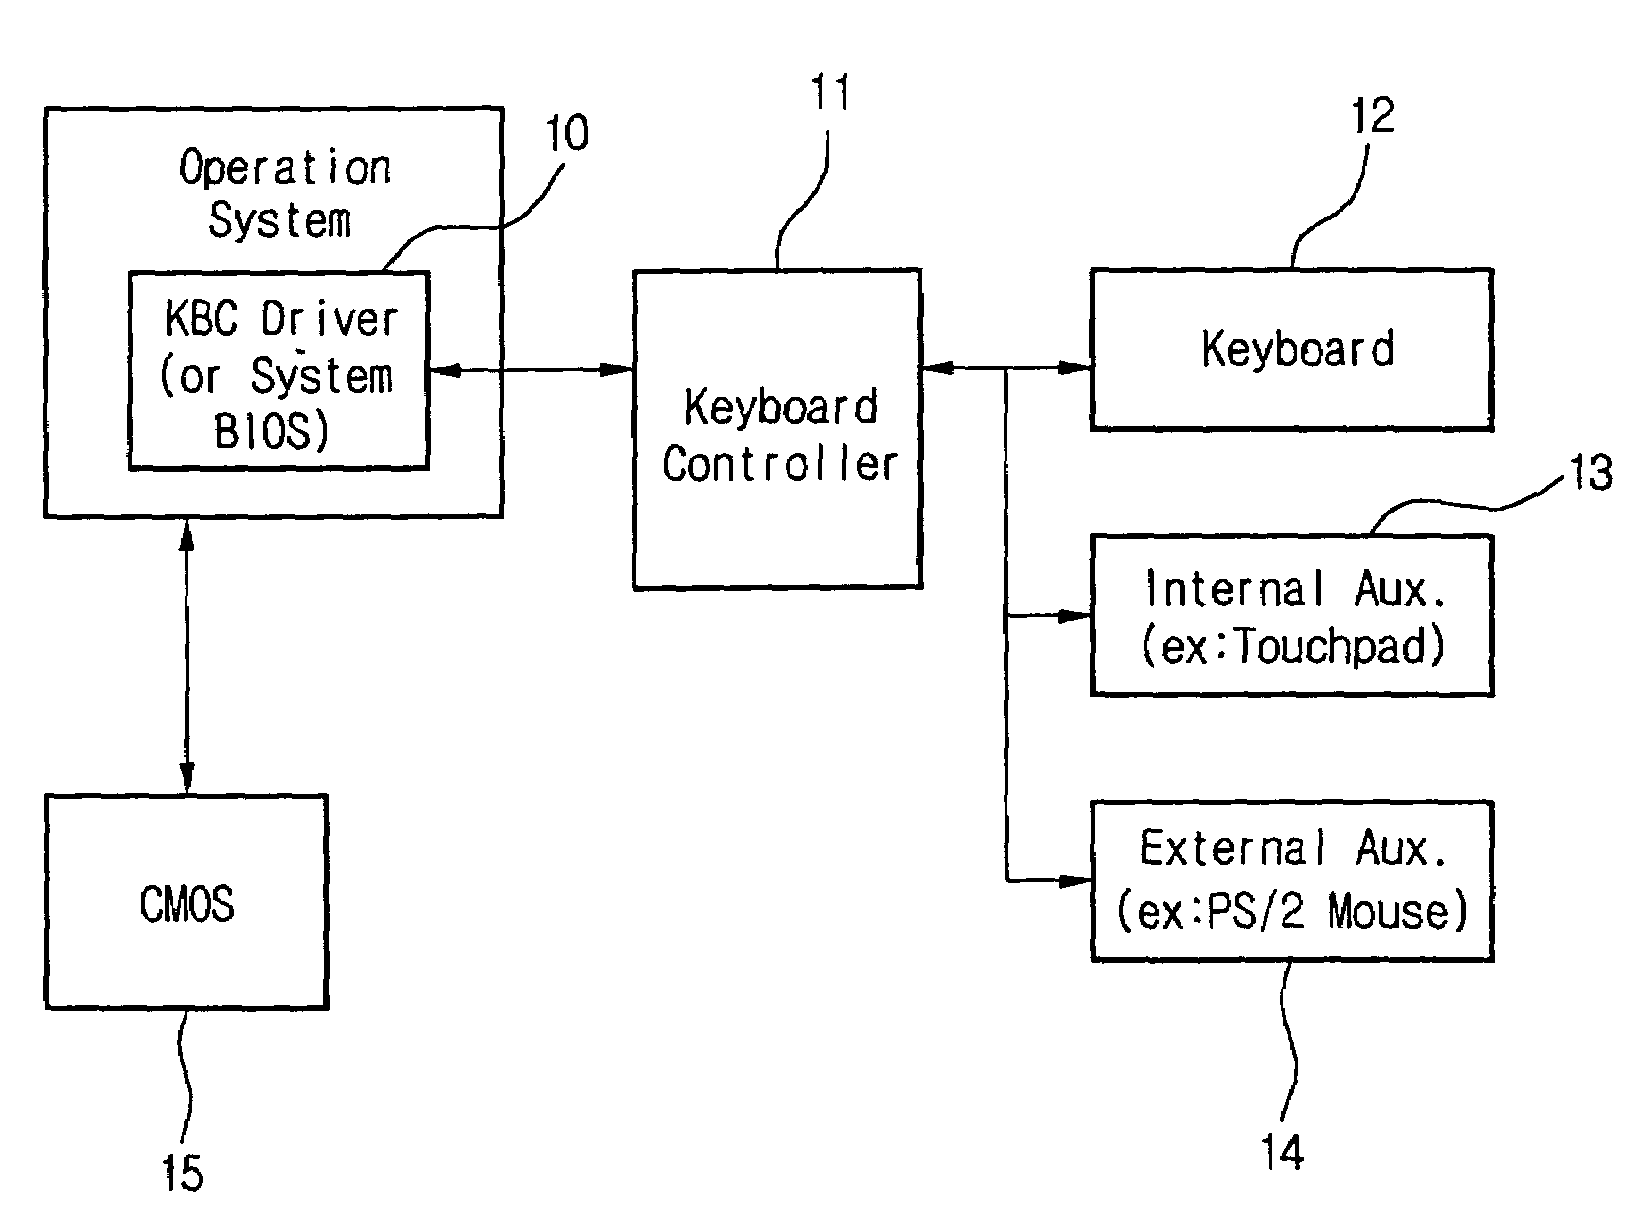 Apparatus and method for controlling device operation in computer